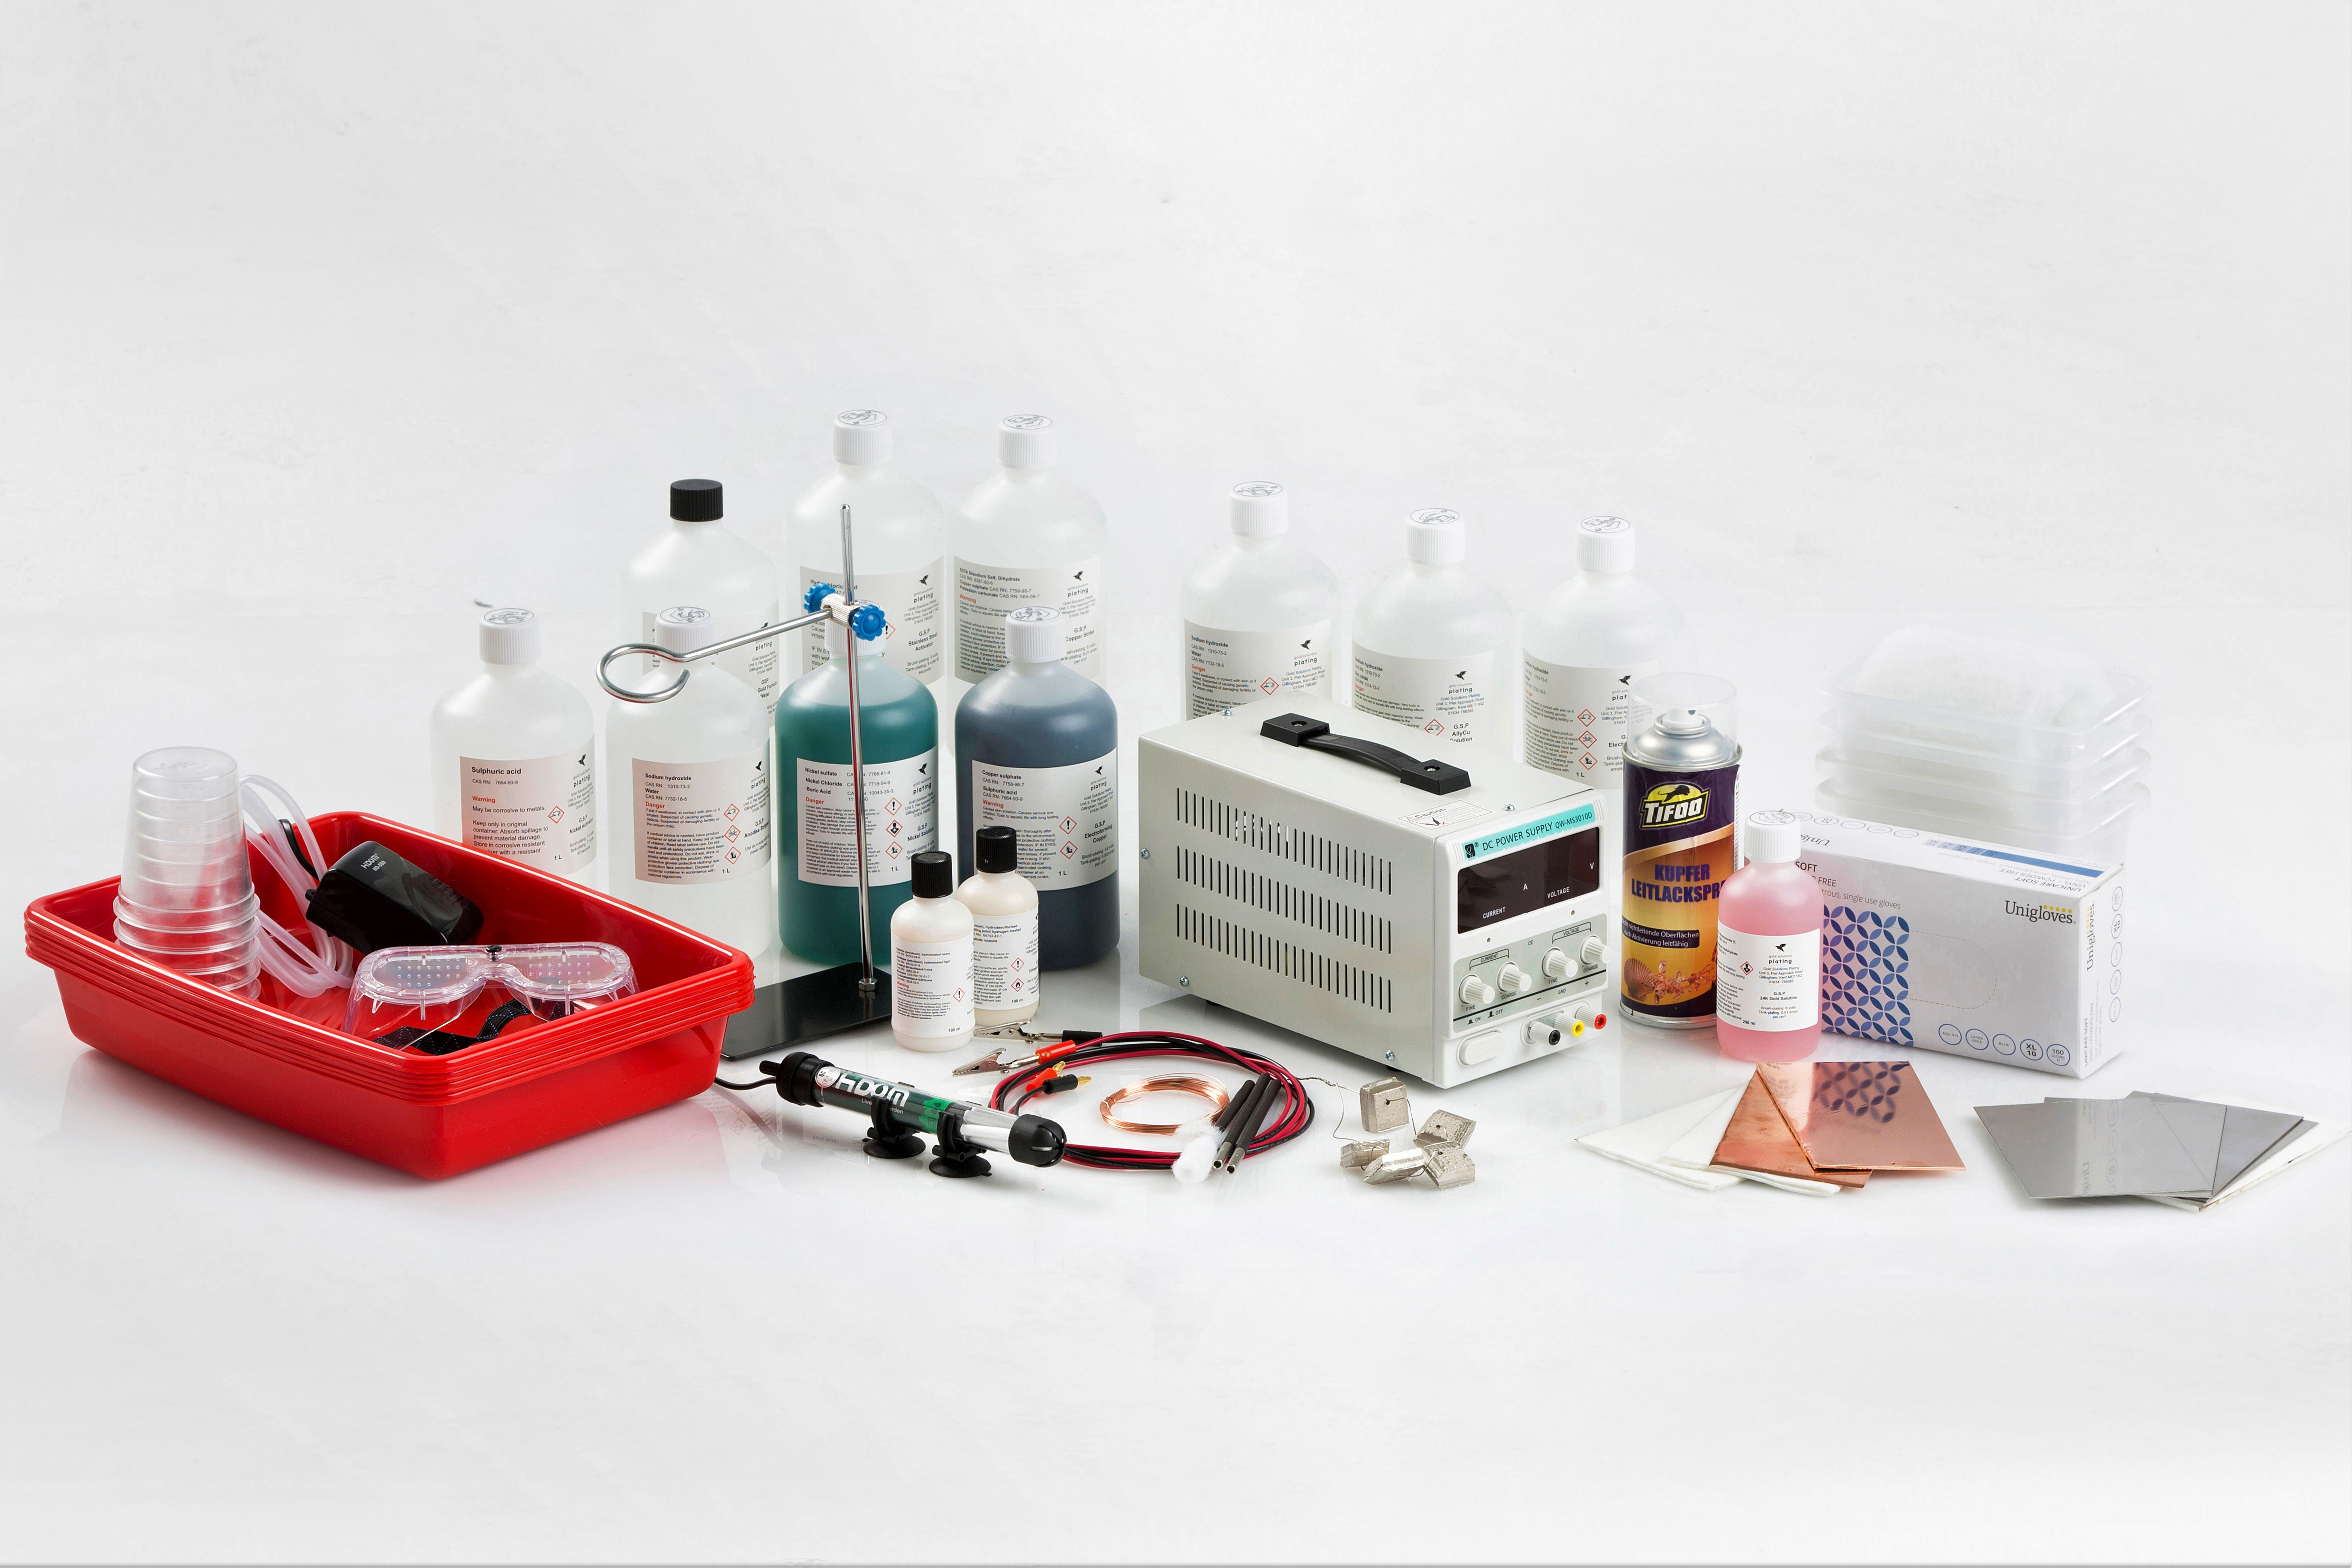 GSP Prodigy 1 litre Electroforming and Electroplating Kit Contents